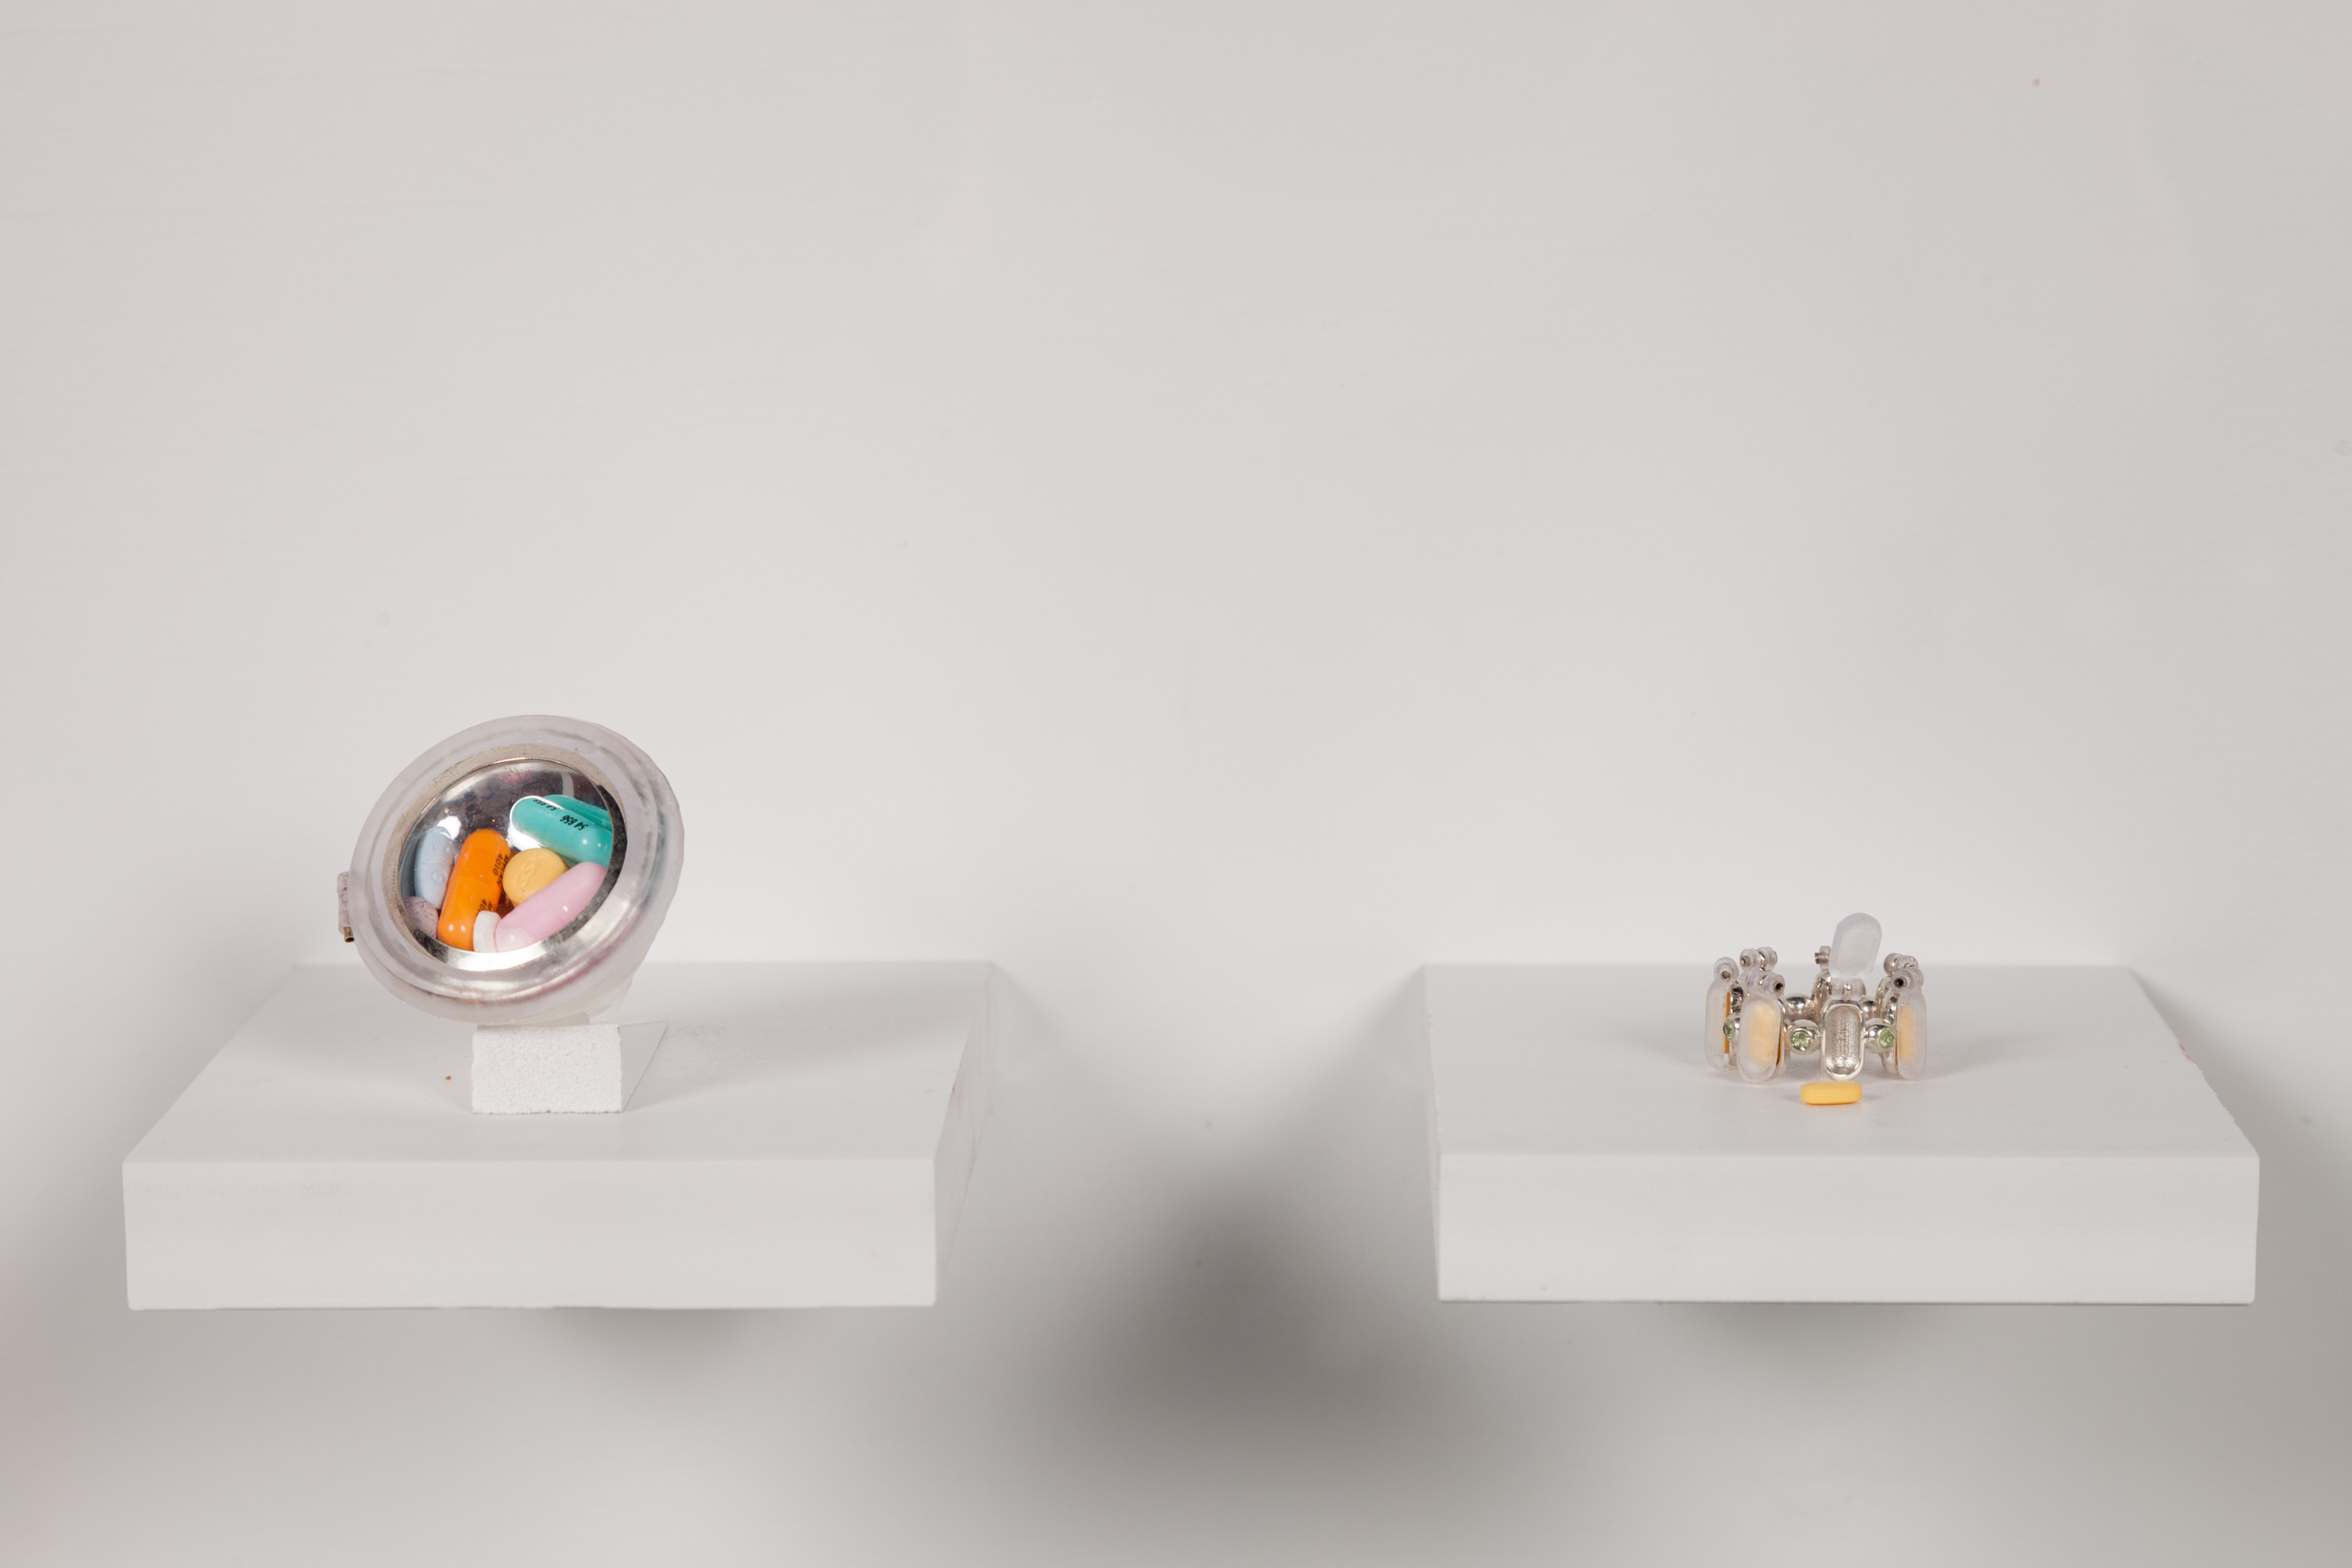 two rings made of silver and resin on small shelves, the rings contain prescription medication